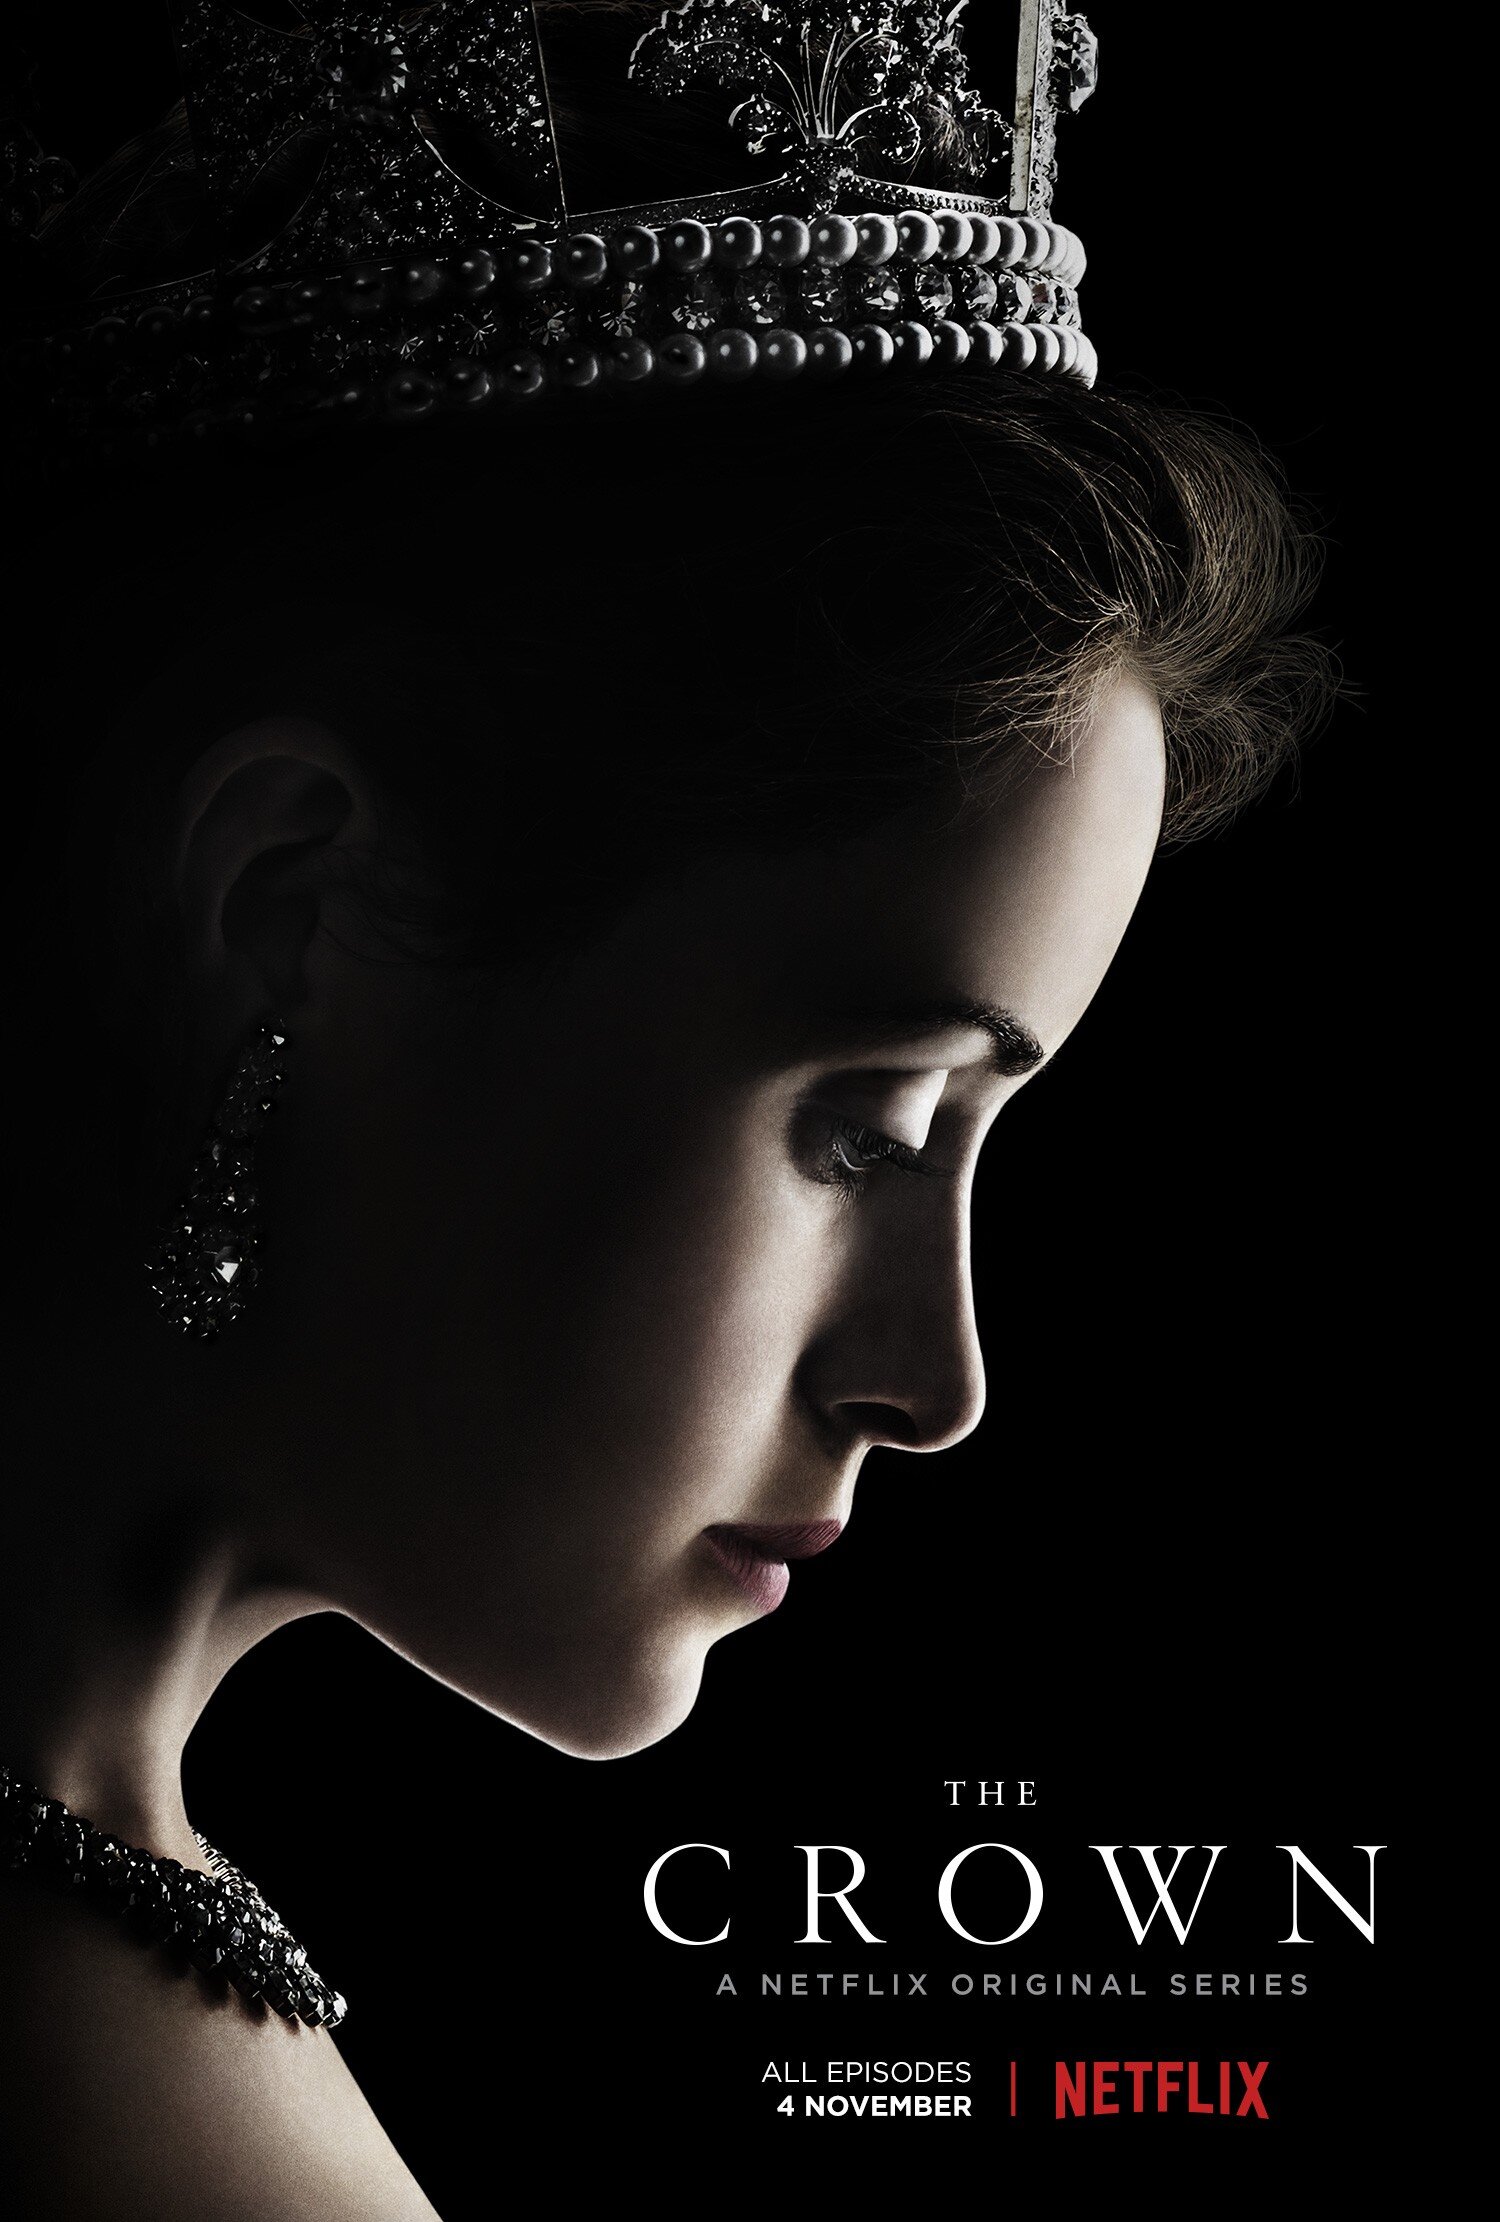 The Crown Web Series Star Cast, Facts and Review.